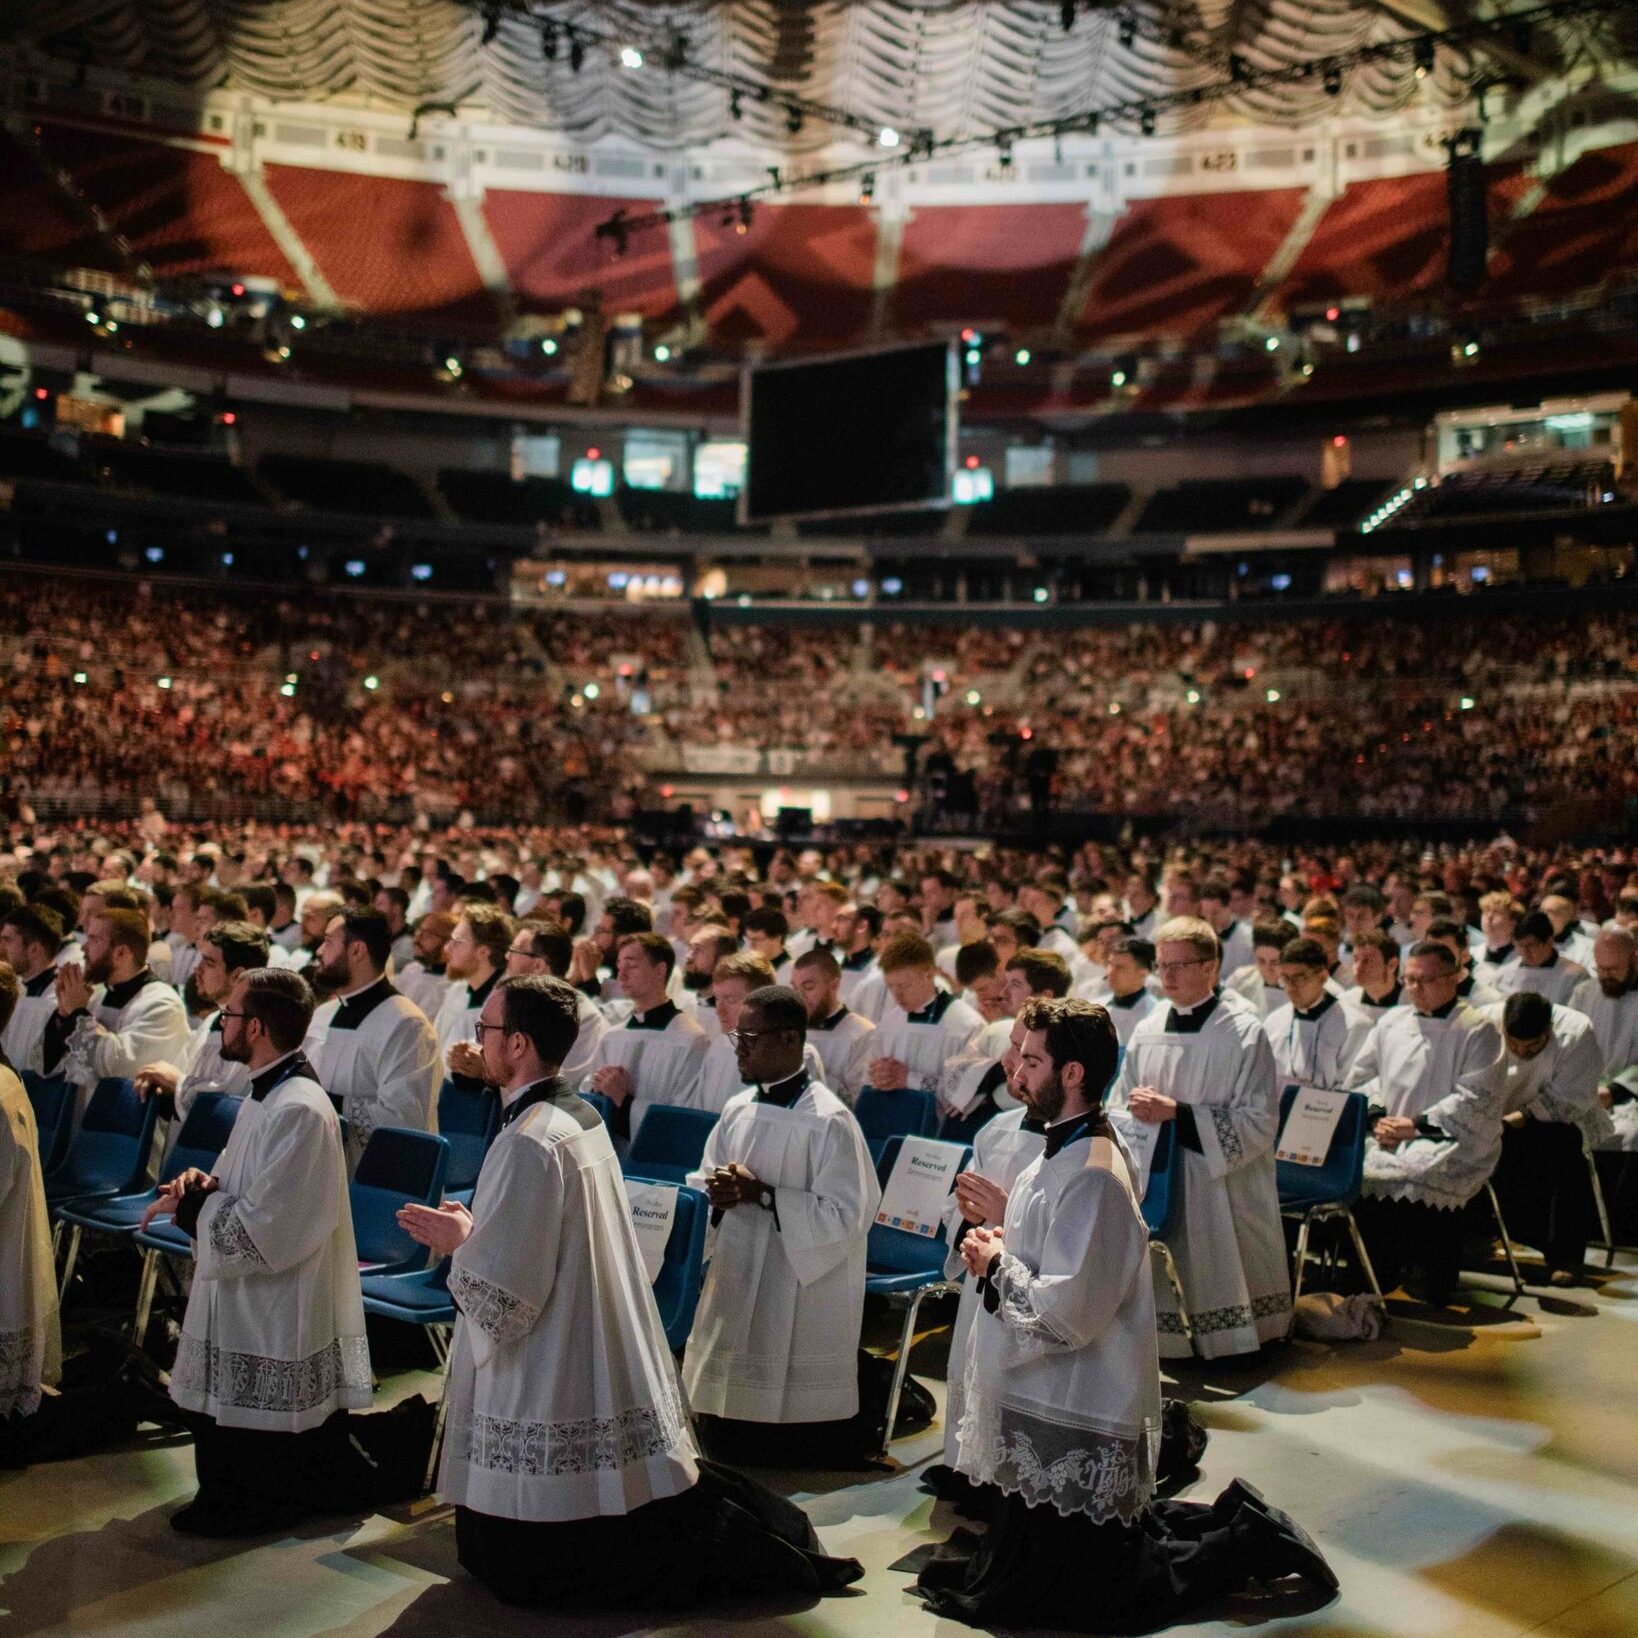 Nearly 20,000 people from across the country, including more than 100 from our diocese, attended SEEK24 in St. Louis. Here, thousands kneel in prayer inside the Dome at America’s Center.

<br><em>Photo courtesy of FOCUS</em>